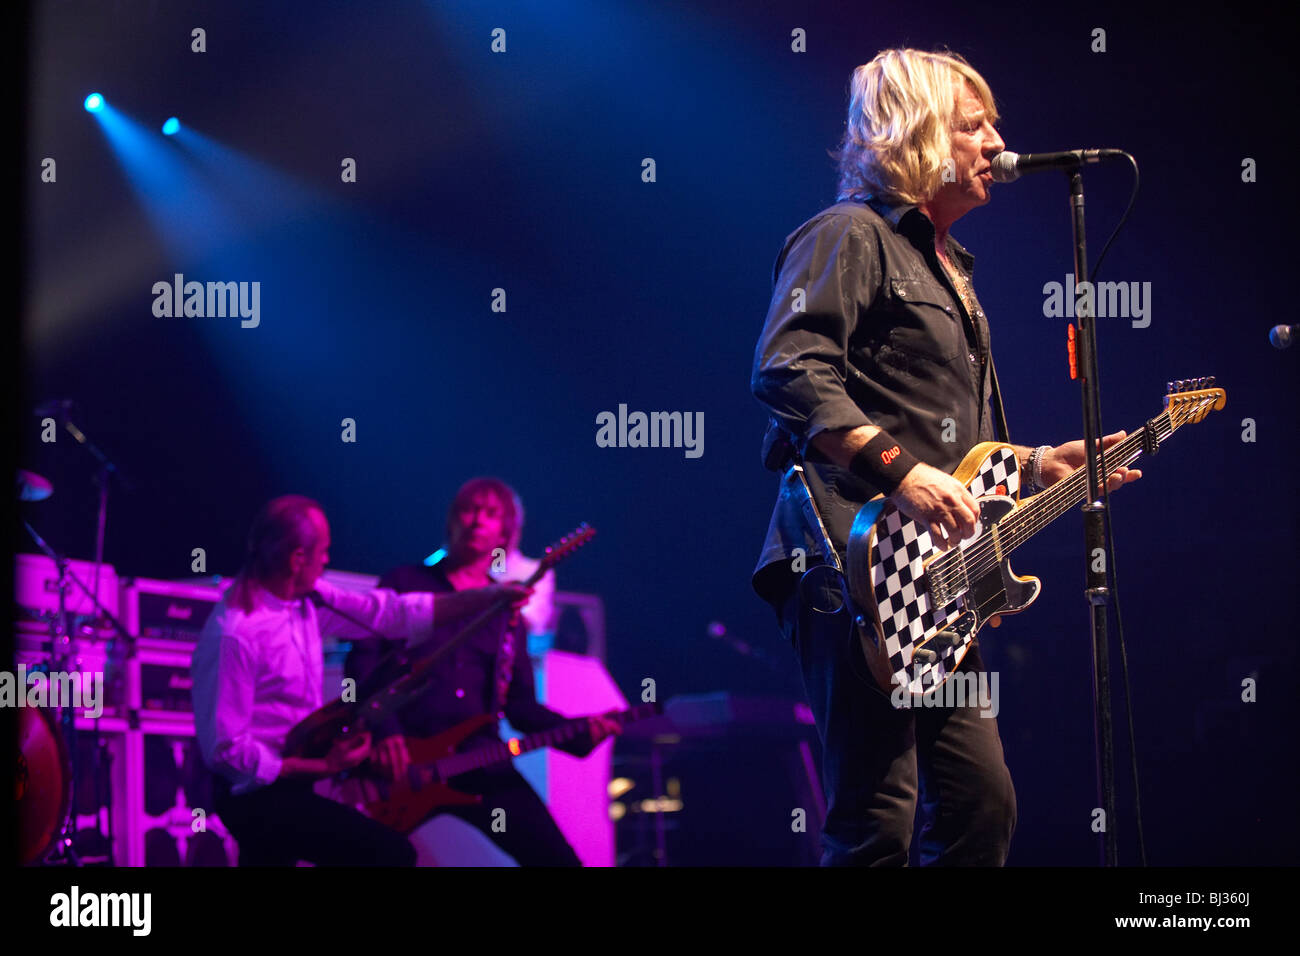 British rock and roll band Status Quo on stage during their European Tour. Stock Photo